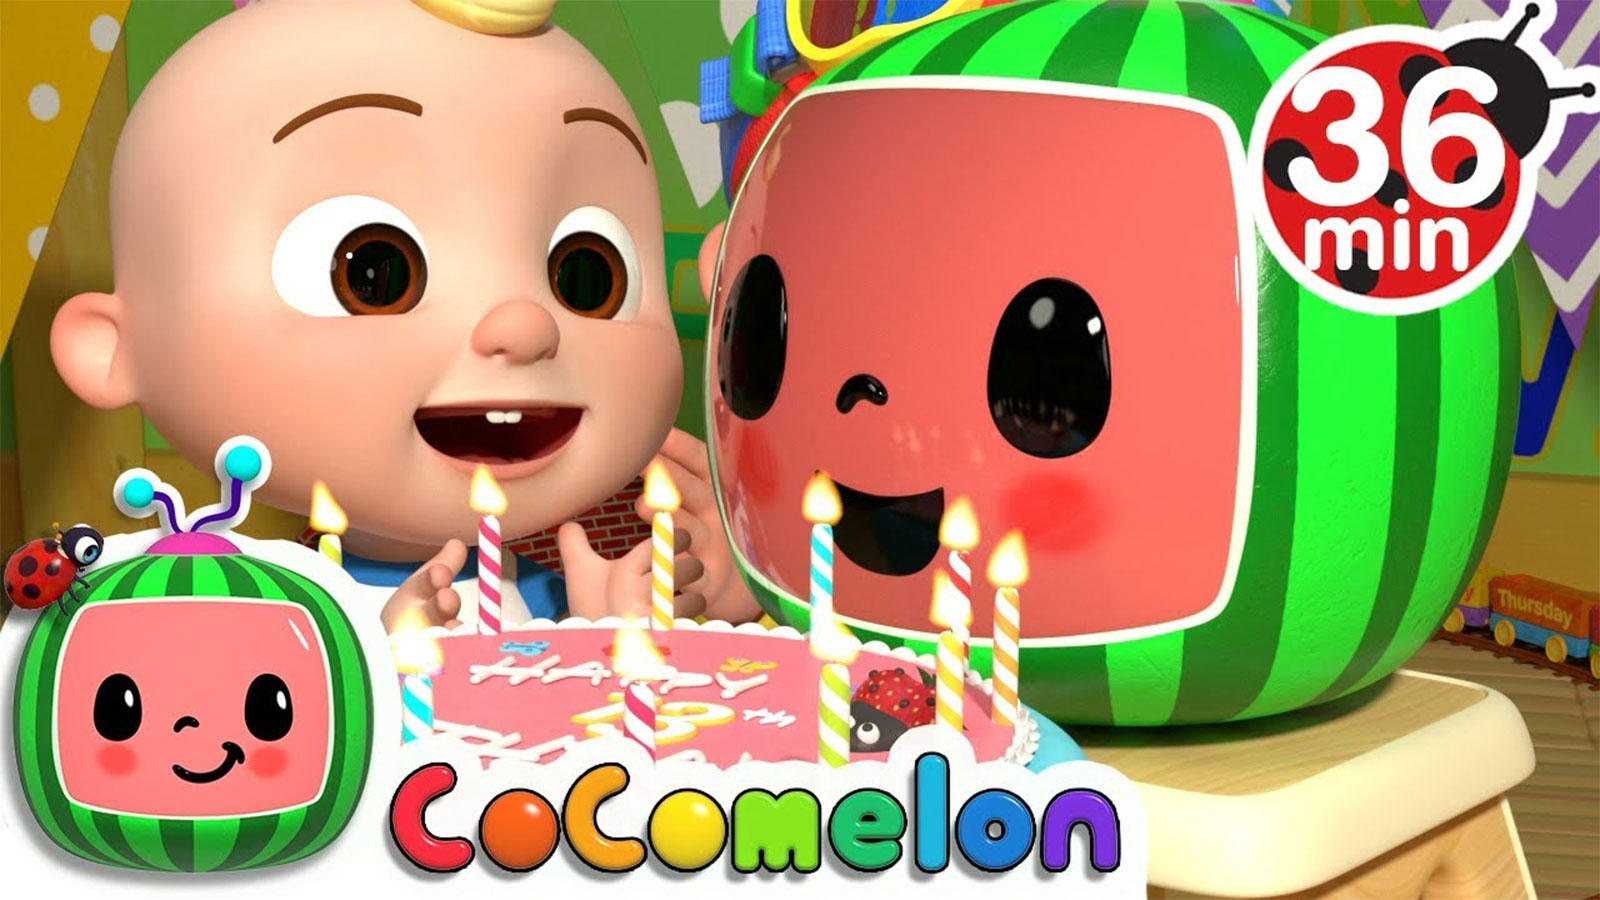 Watch Popular Children English Nursery Rhyme 'CoComelon's 13th Birthday'  for Kids - Check out Fun Kids Nursery Rhymes And Baby Songs In English. |  Entertainment - Times of India Videos